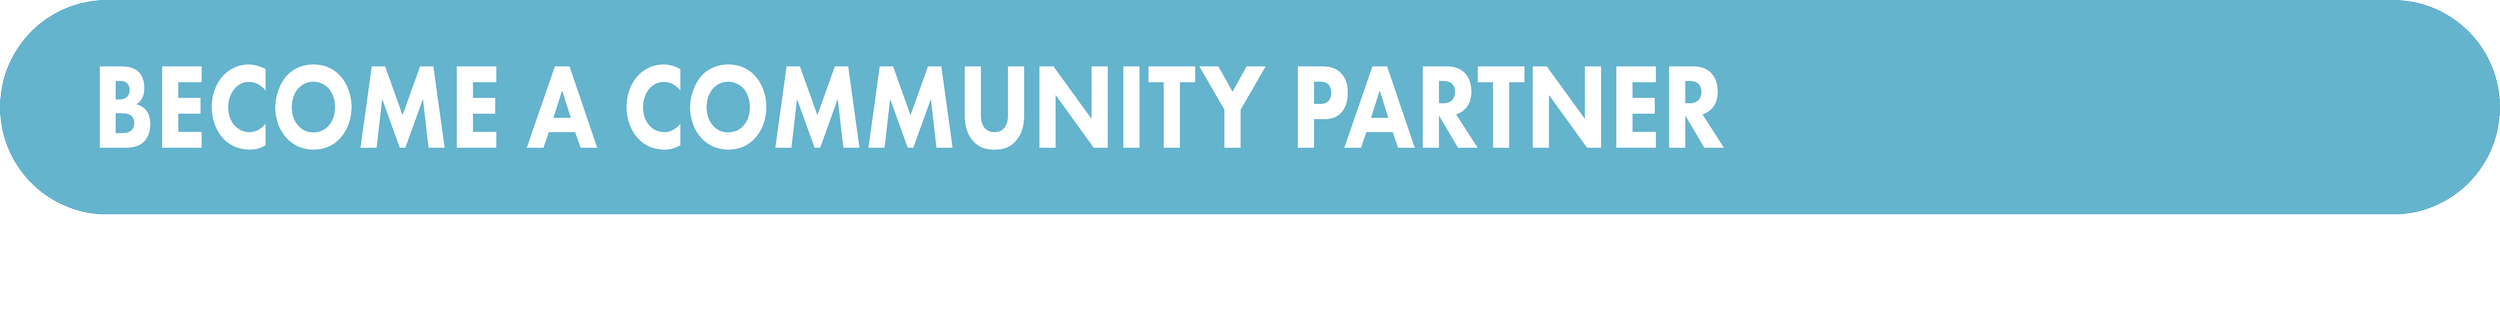 teal community partner button.png